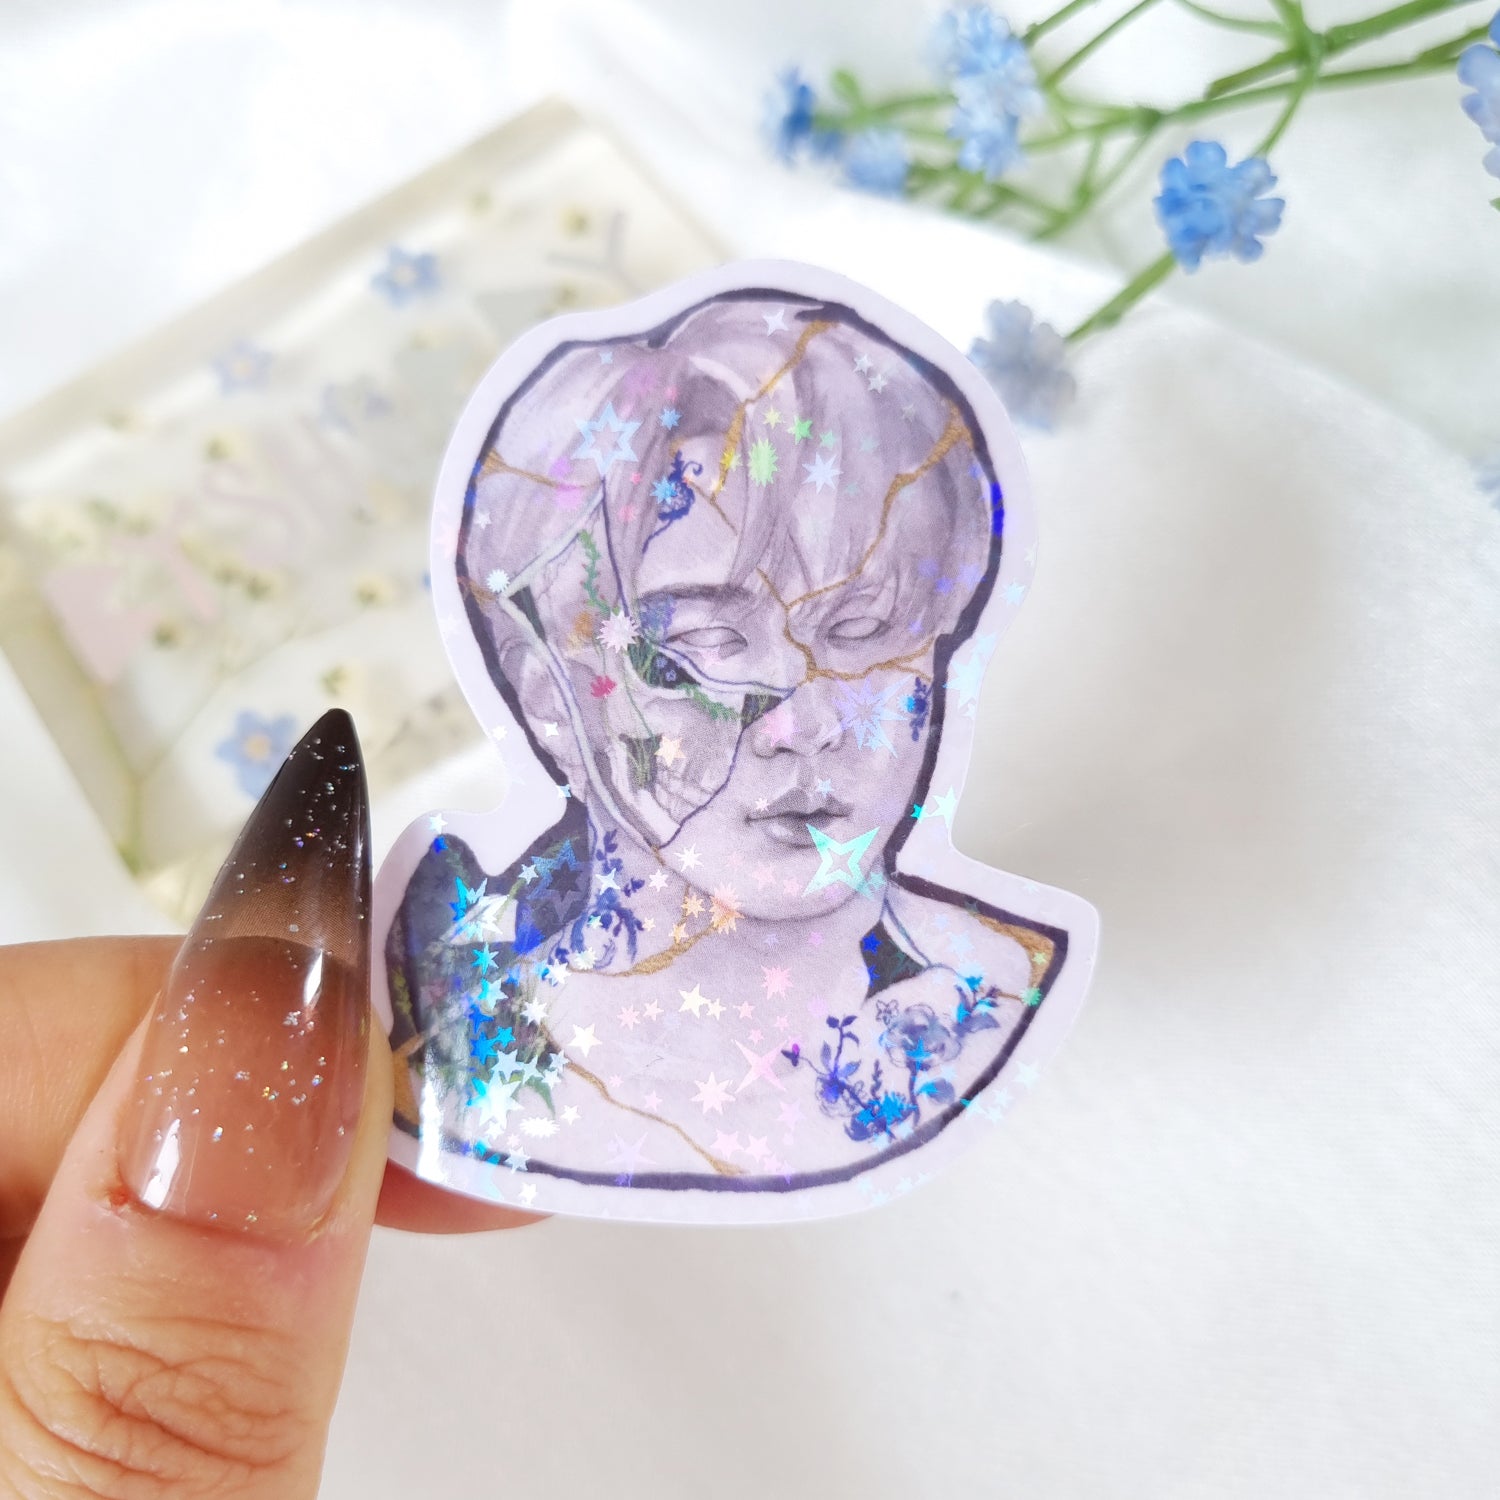 Vinyl Holographic Star Glitter Stickers -  Buy 4 get one free